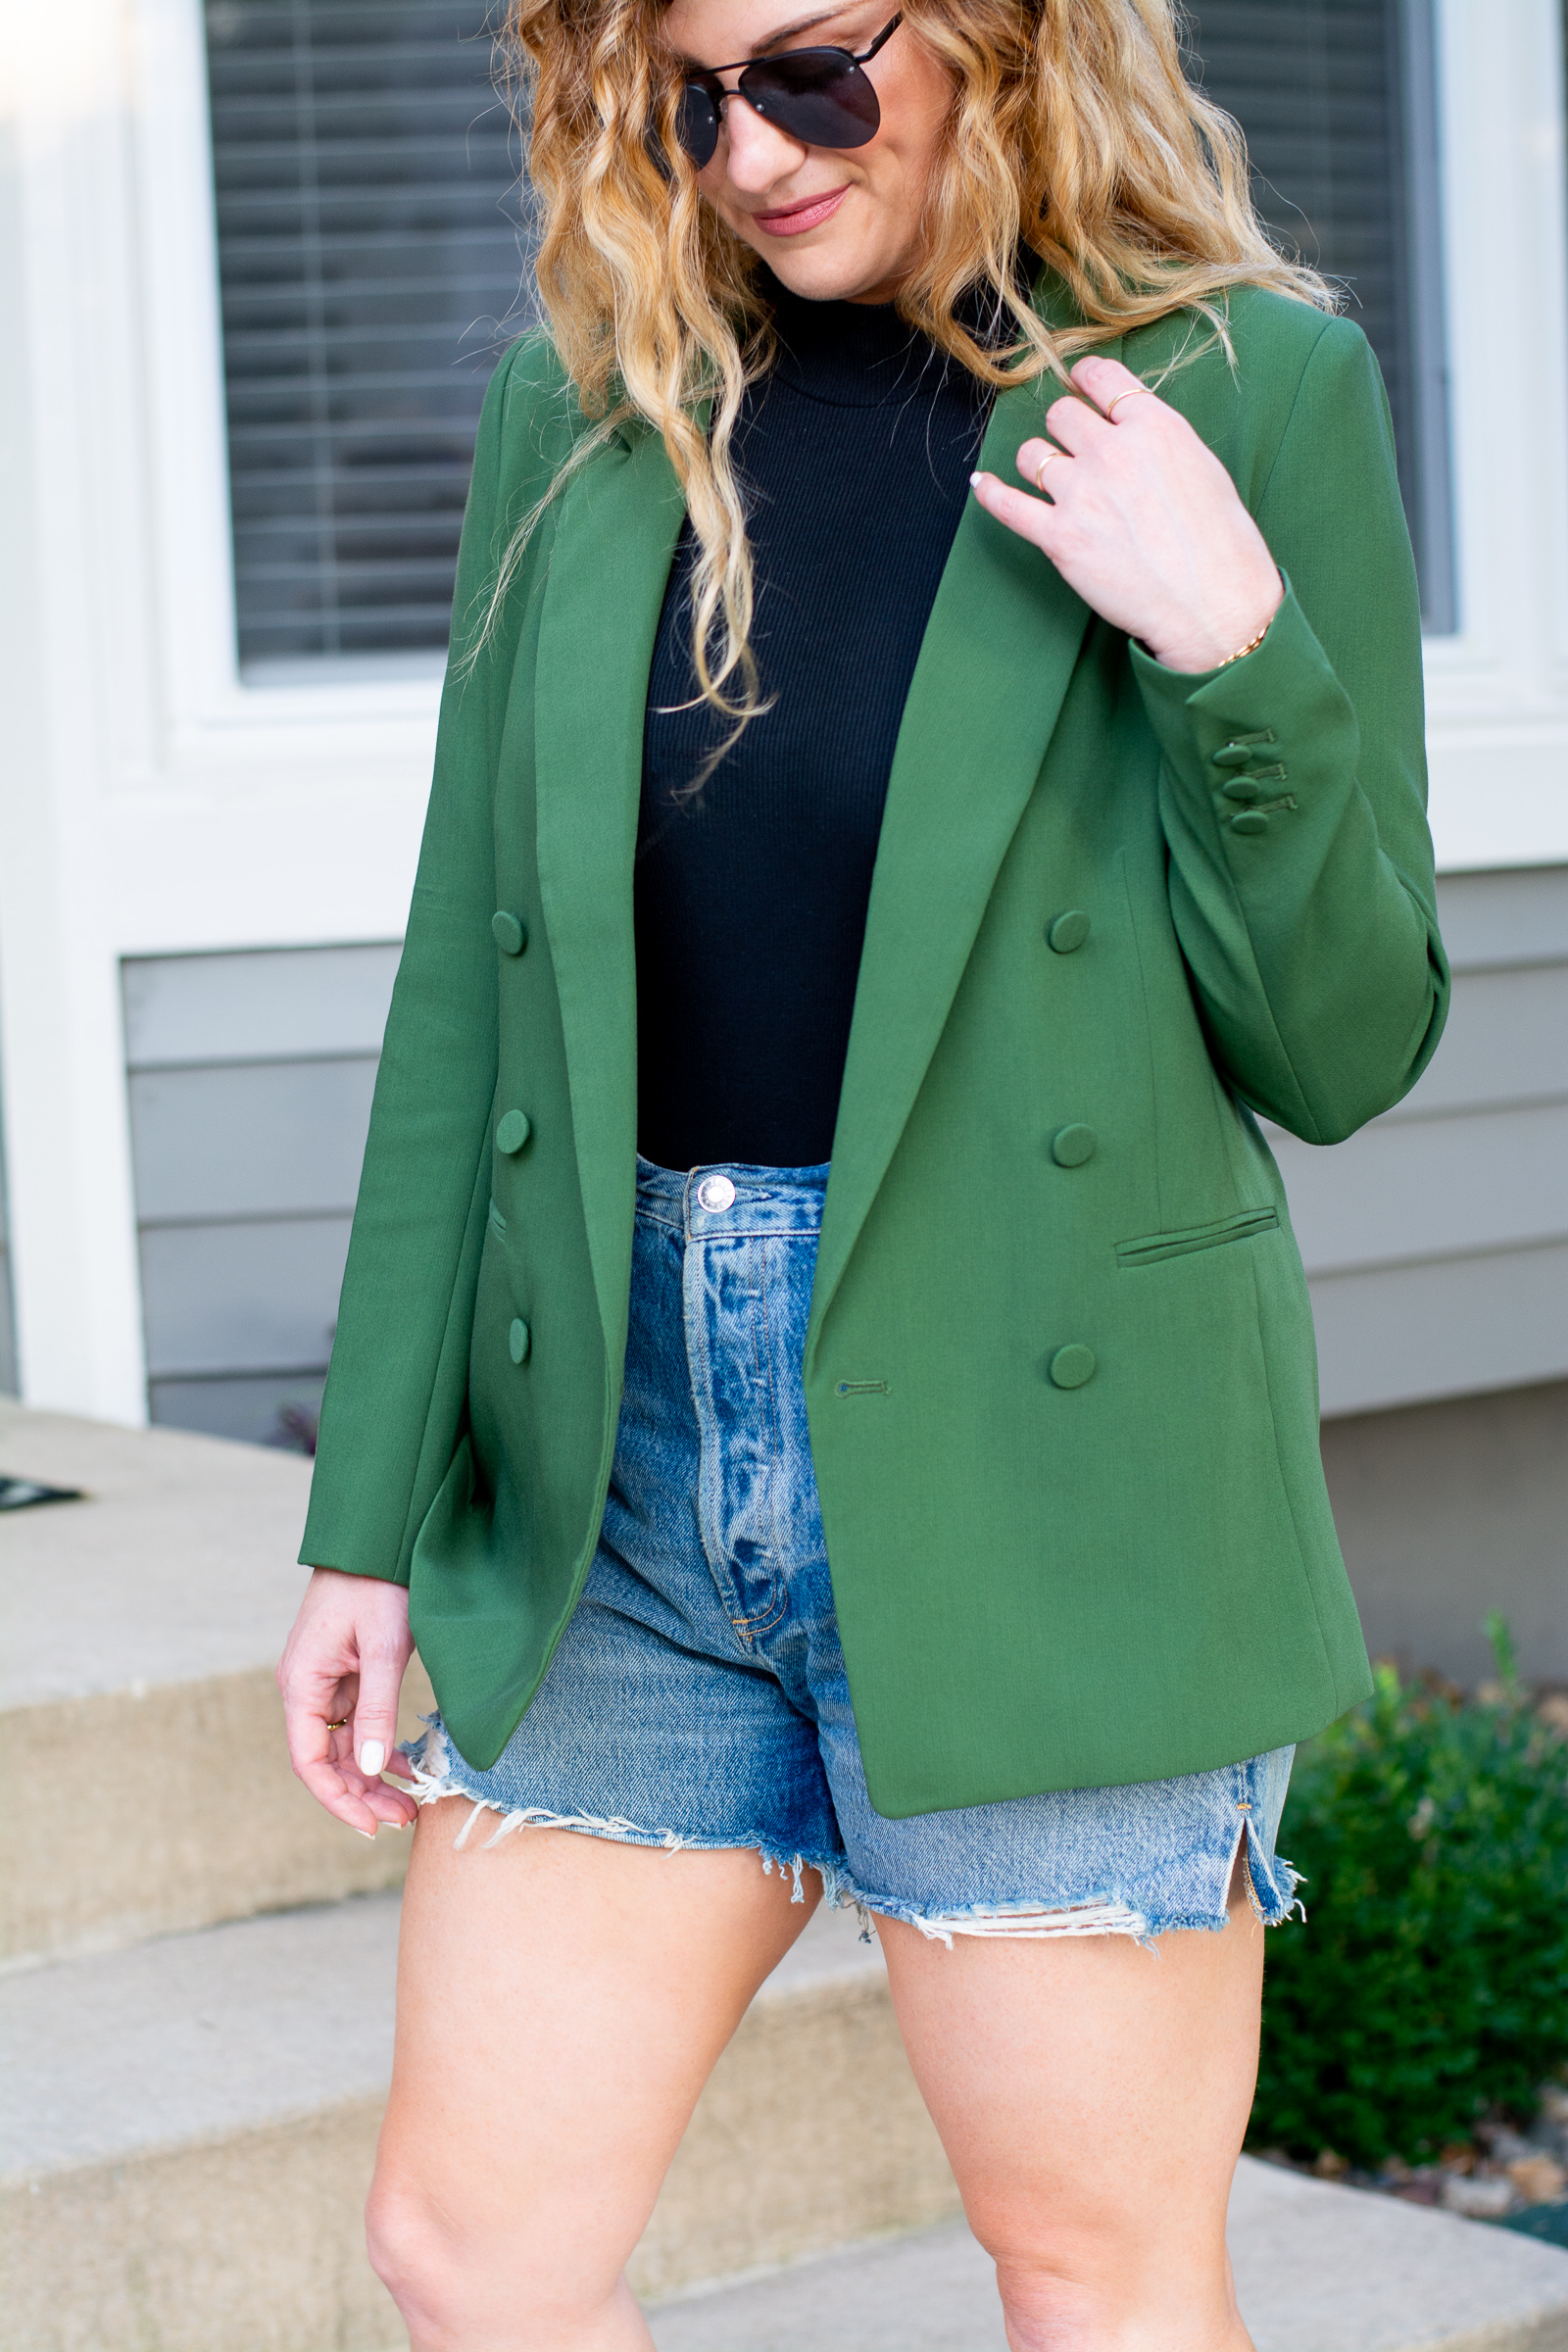 Fall Transition Outfit: Blazers and Cutoff Shorts. | LSR